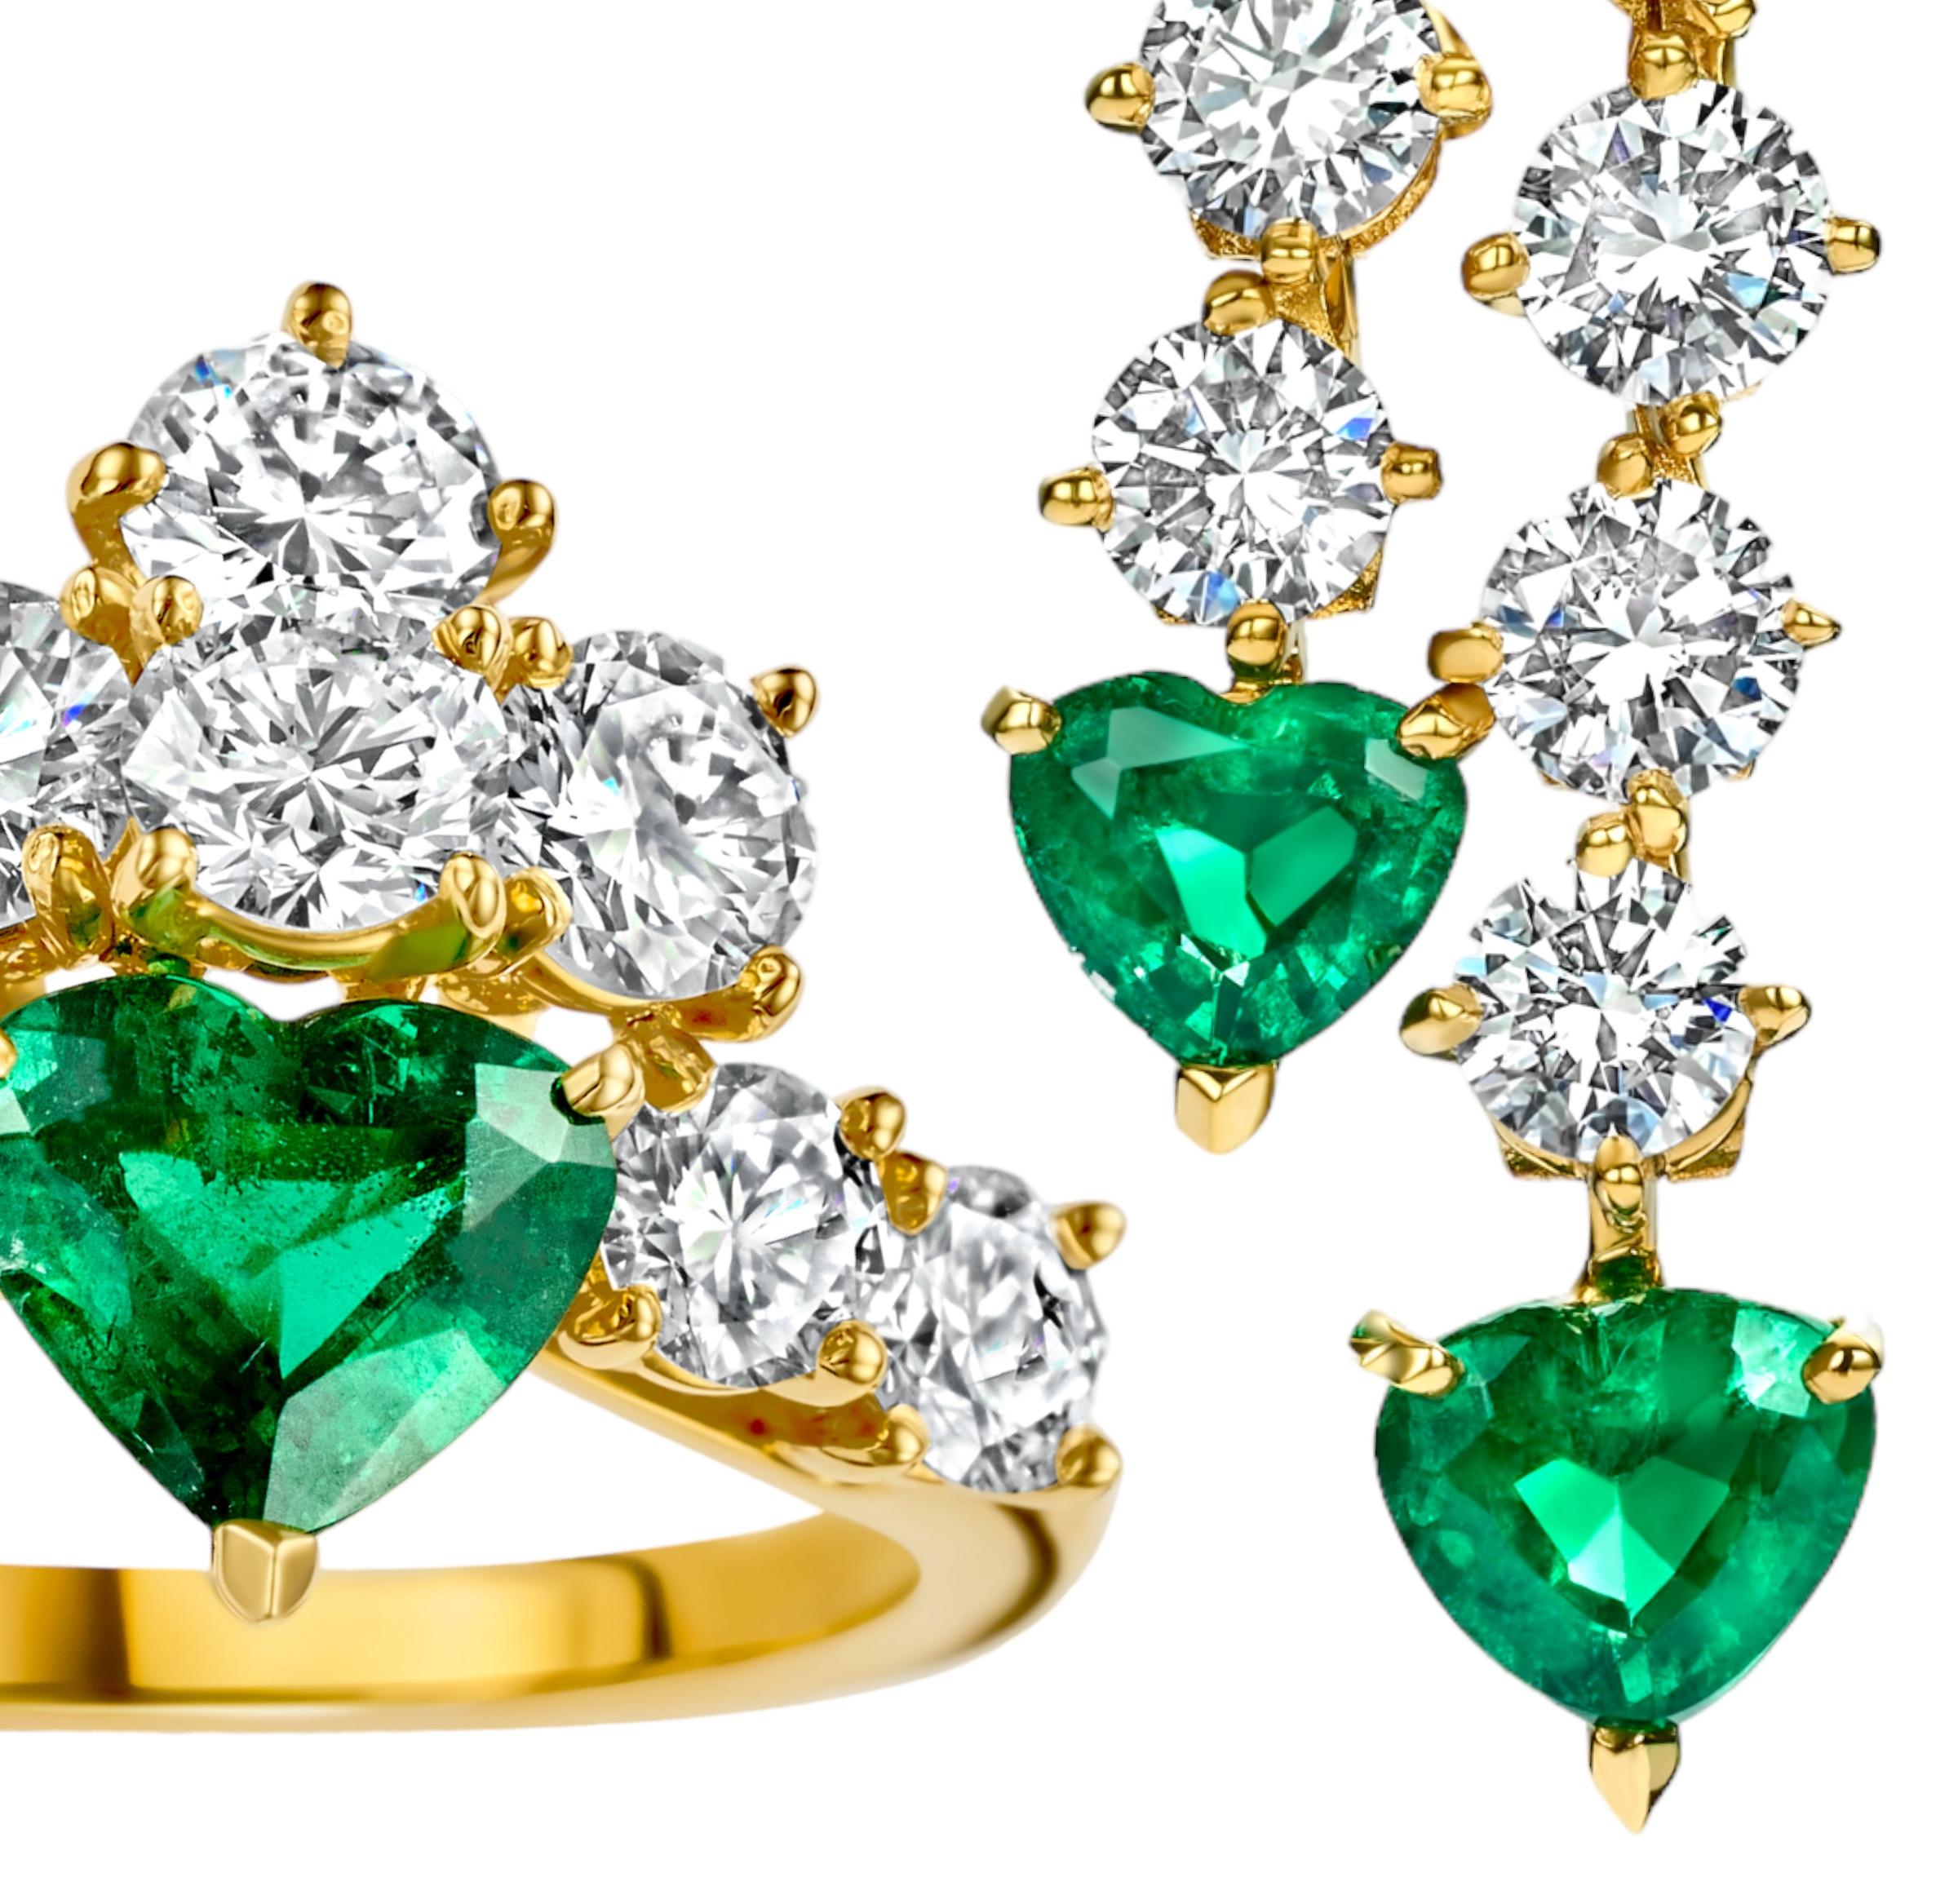 Magnificant 18 kt. Yellow Gold Asprey Genève Set Clip On Earrings and Ring with Emeralds and Diamonds, Estate from His Majesty The Sultan Of Oman Qaboos Bin Said.

Earrings:
Clip on earrings suitable for unpierced ears on request we can adjust pins